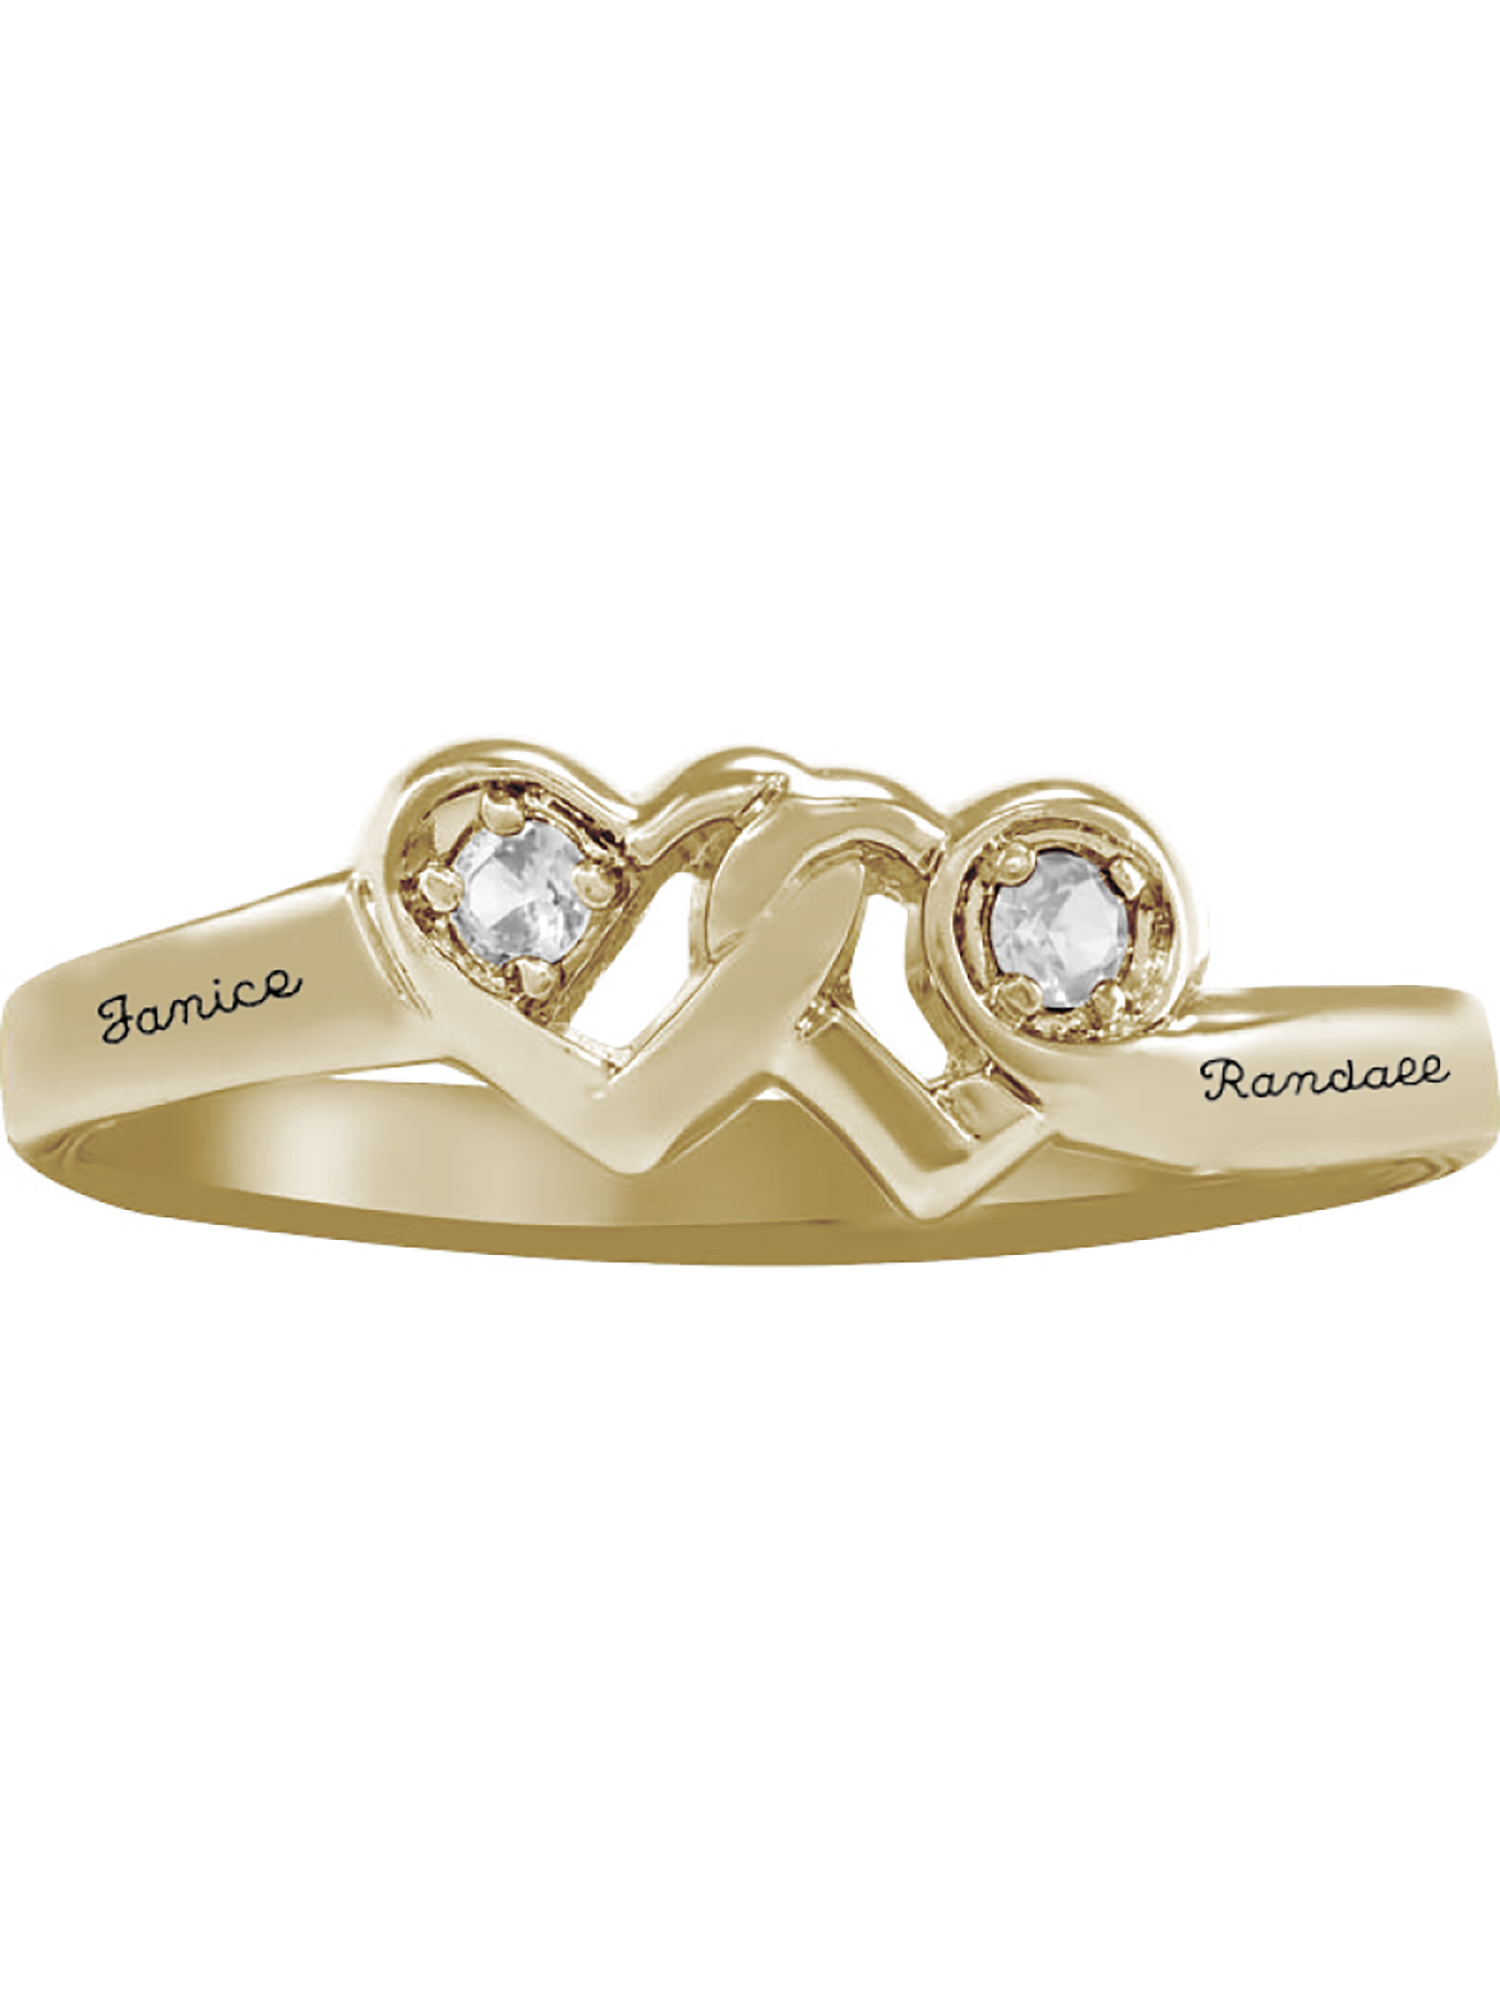 Personalized Family Jewelry Couple's Loving Promise Ring with Diamonds available in 10kt and 14kt Yellow and White Gold - image 1 of 5